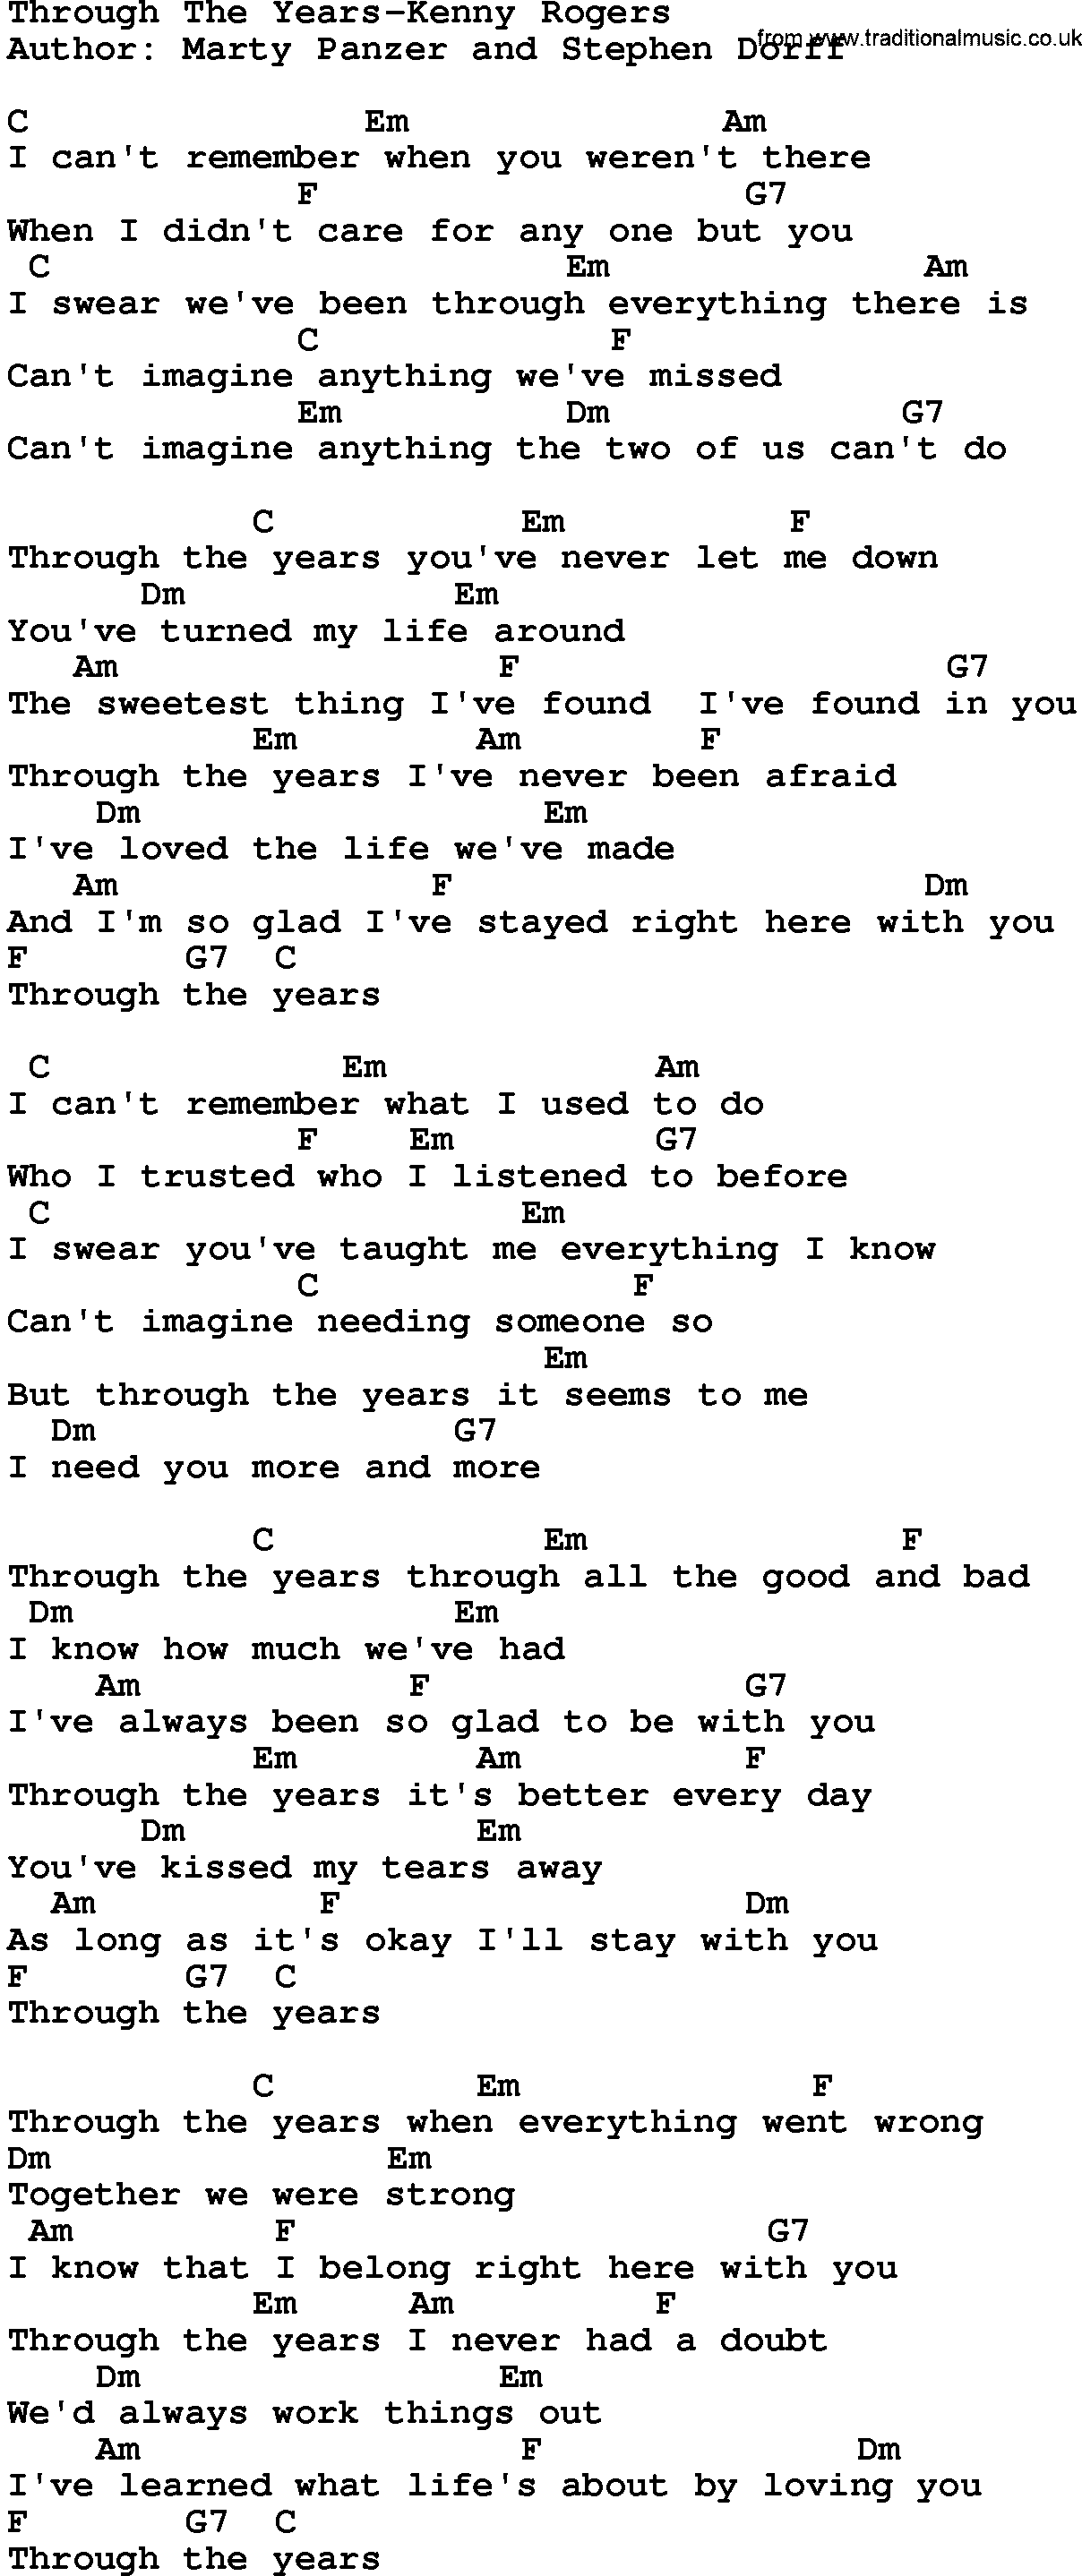 Country music song: Through The Years-Kenny Rogers lyrics and chords